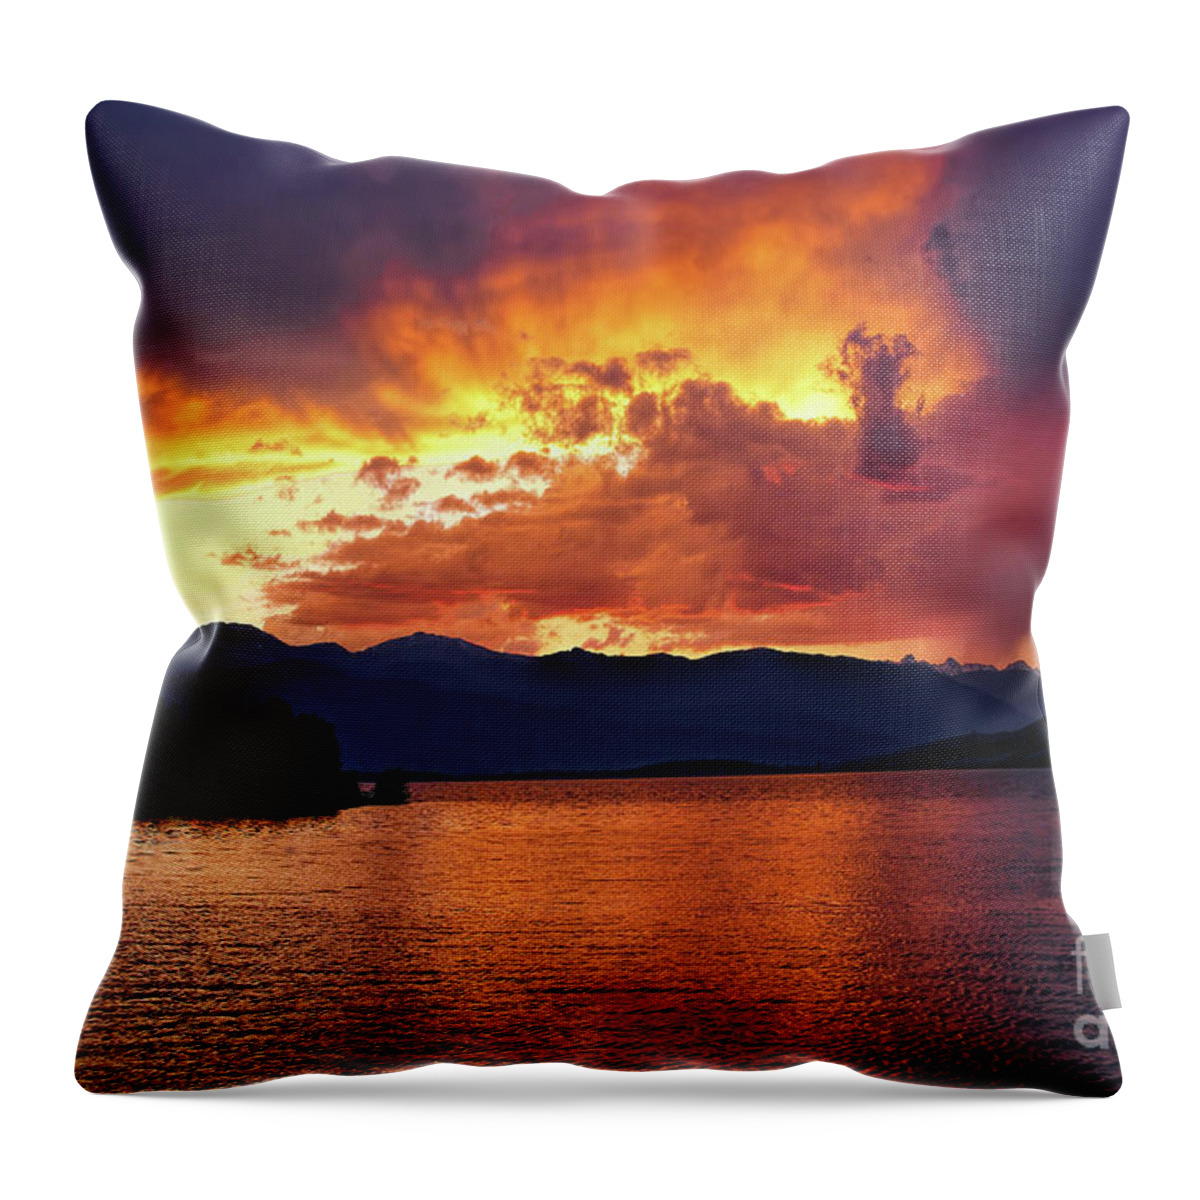 Hebgen Lake Sunset Throw Pillow featuring the photograph Hebgen Lake Sunset by Jemmy Archer